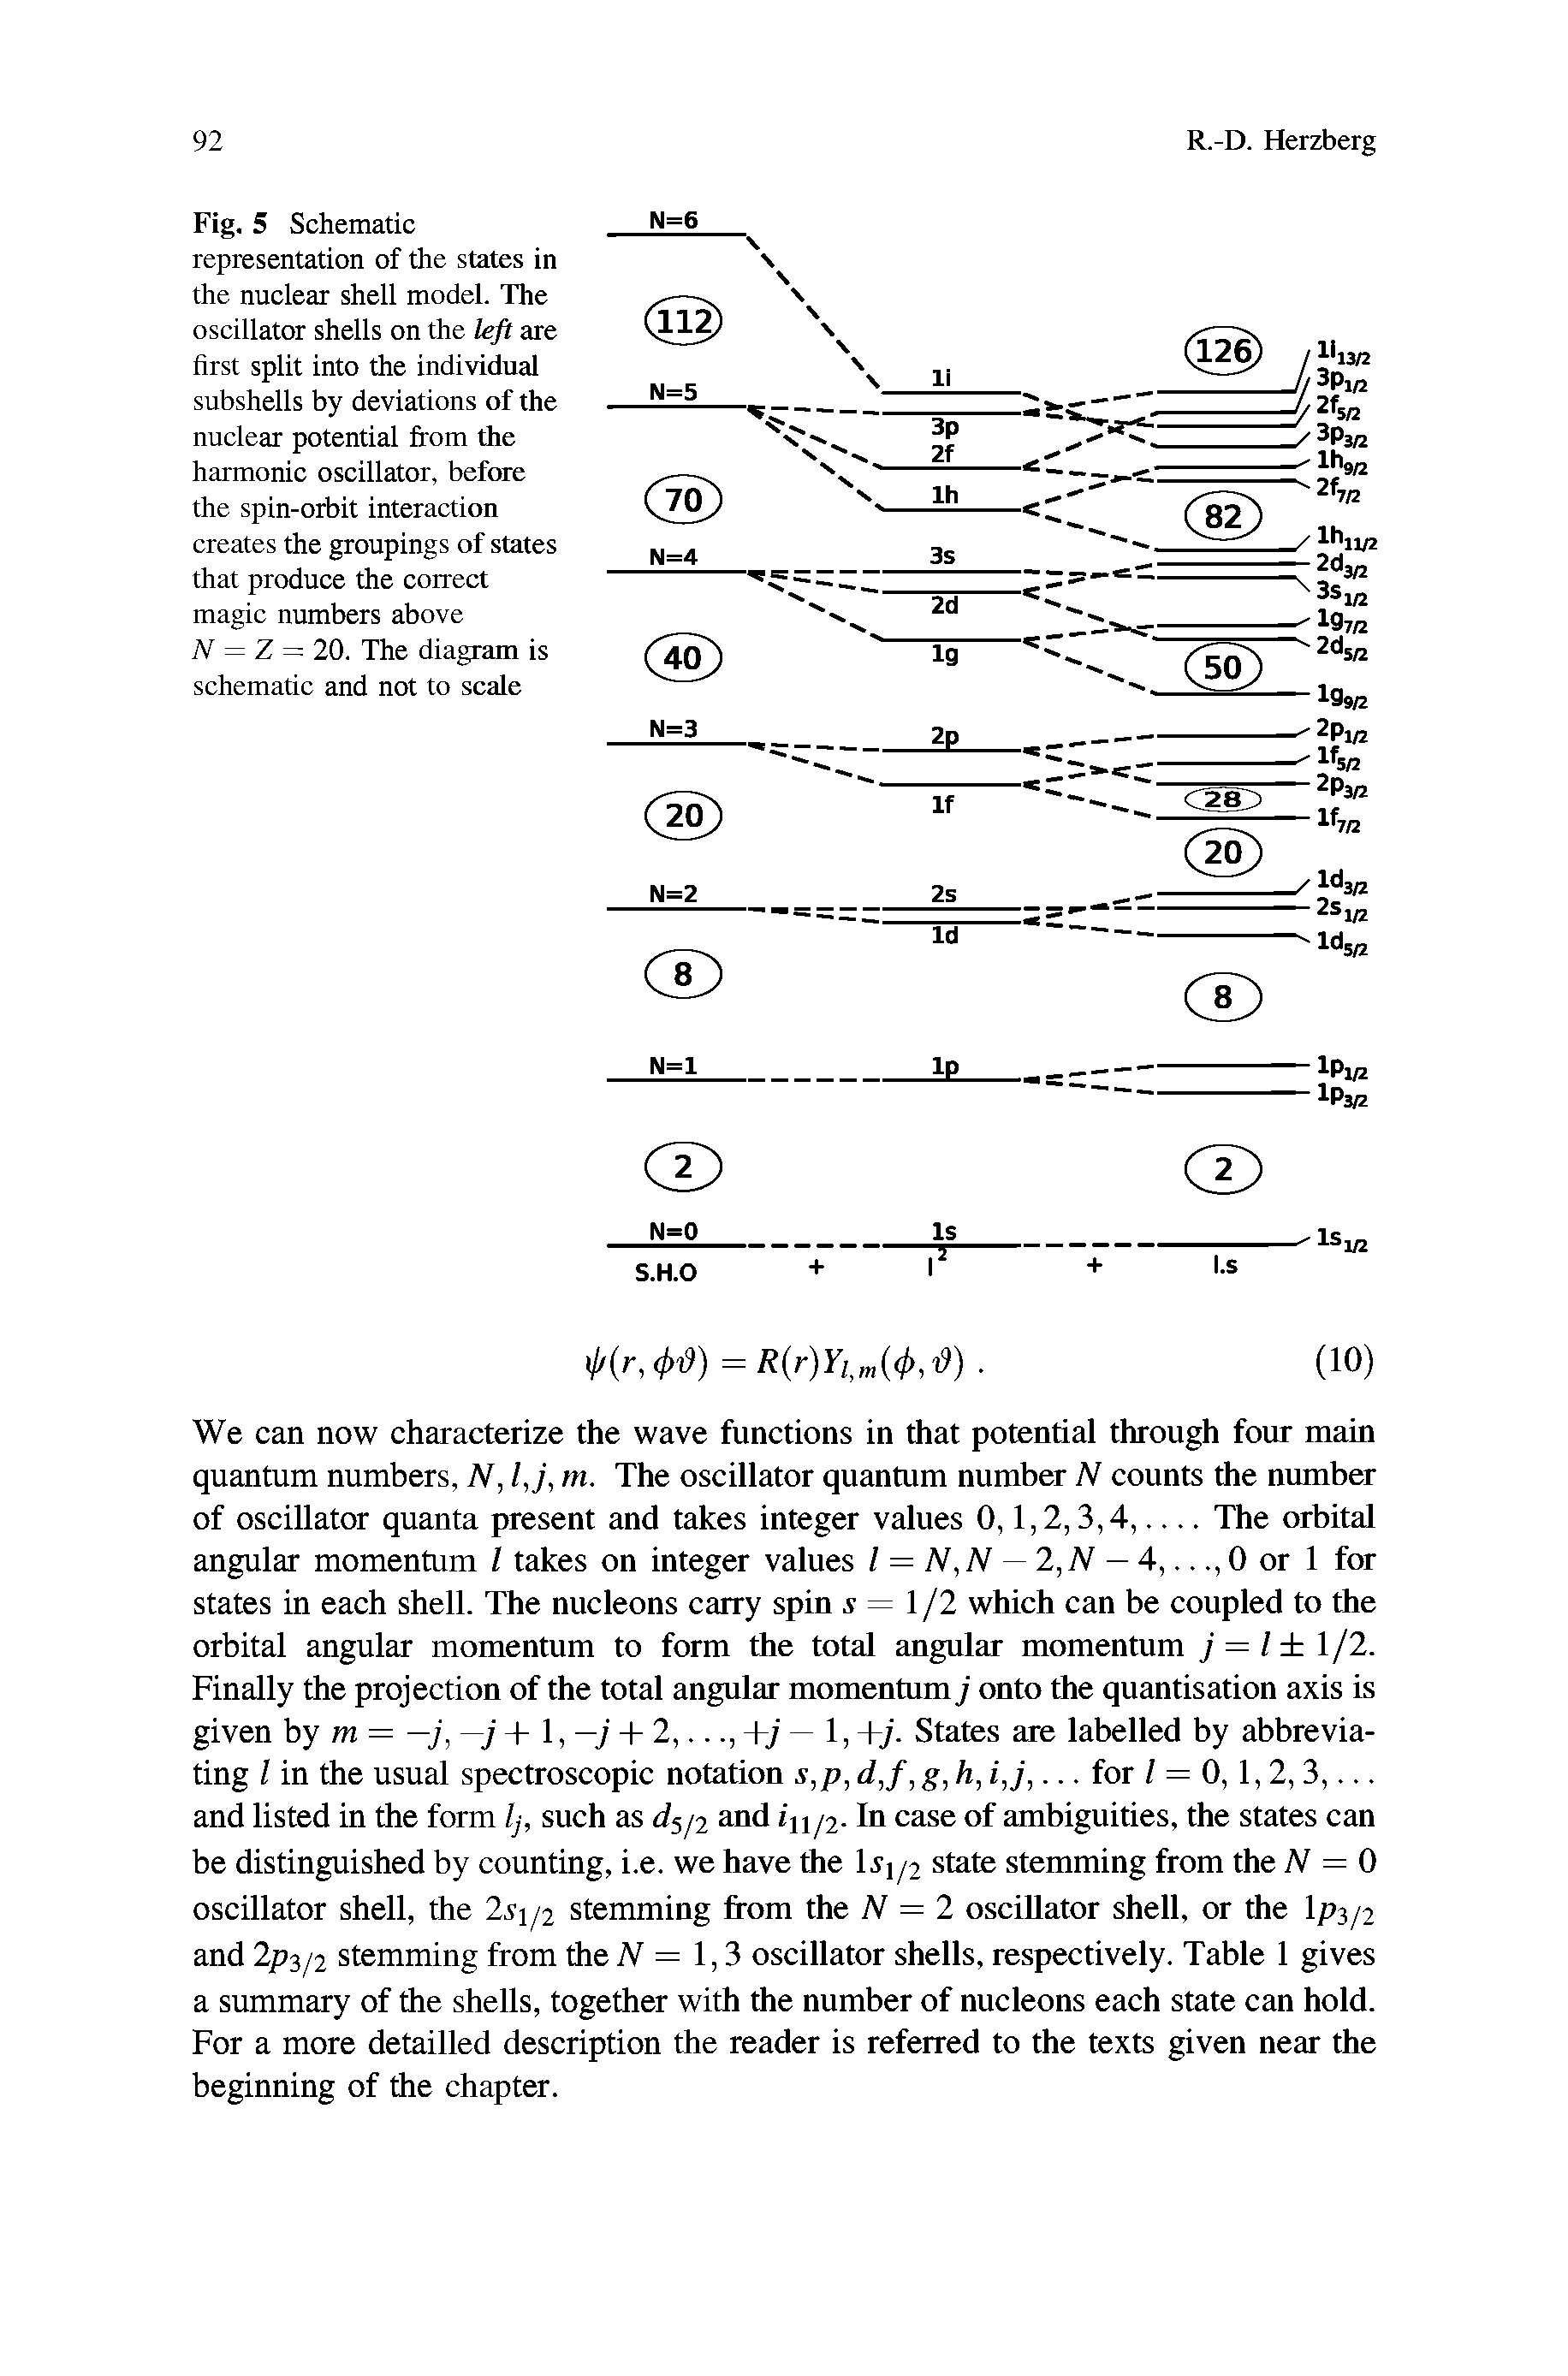 Fig. 5 Schematic representation of the states in the nuclear shell model. The oscillator shells on the left are first split into the individual subshells by deviations of the nuclear potential from the harmonic oscillator, before the spin-orbit interaction creates the groupings of states that produce the correct magic numbers above N = Z = 20. The diagram is schematic and not to scale...